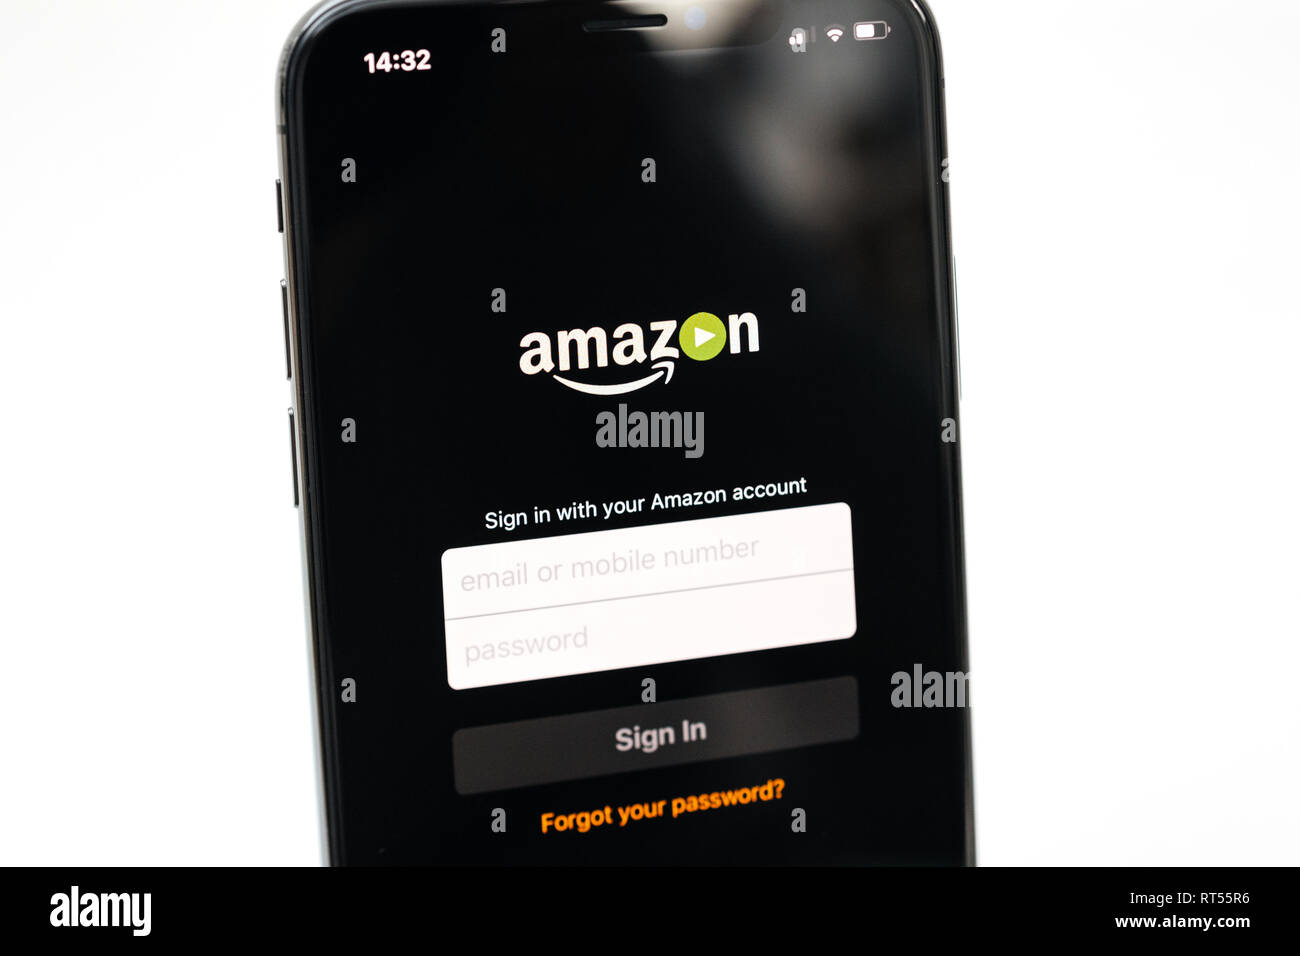 PARIS, FRANCE - NOV 5, 2017: Amazon Prime Video app log-in screen on the new Apple iPhone X 10 smartphone made by Apple Computers  Stock Photo